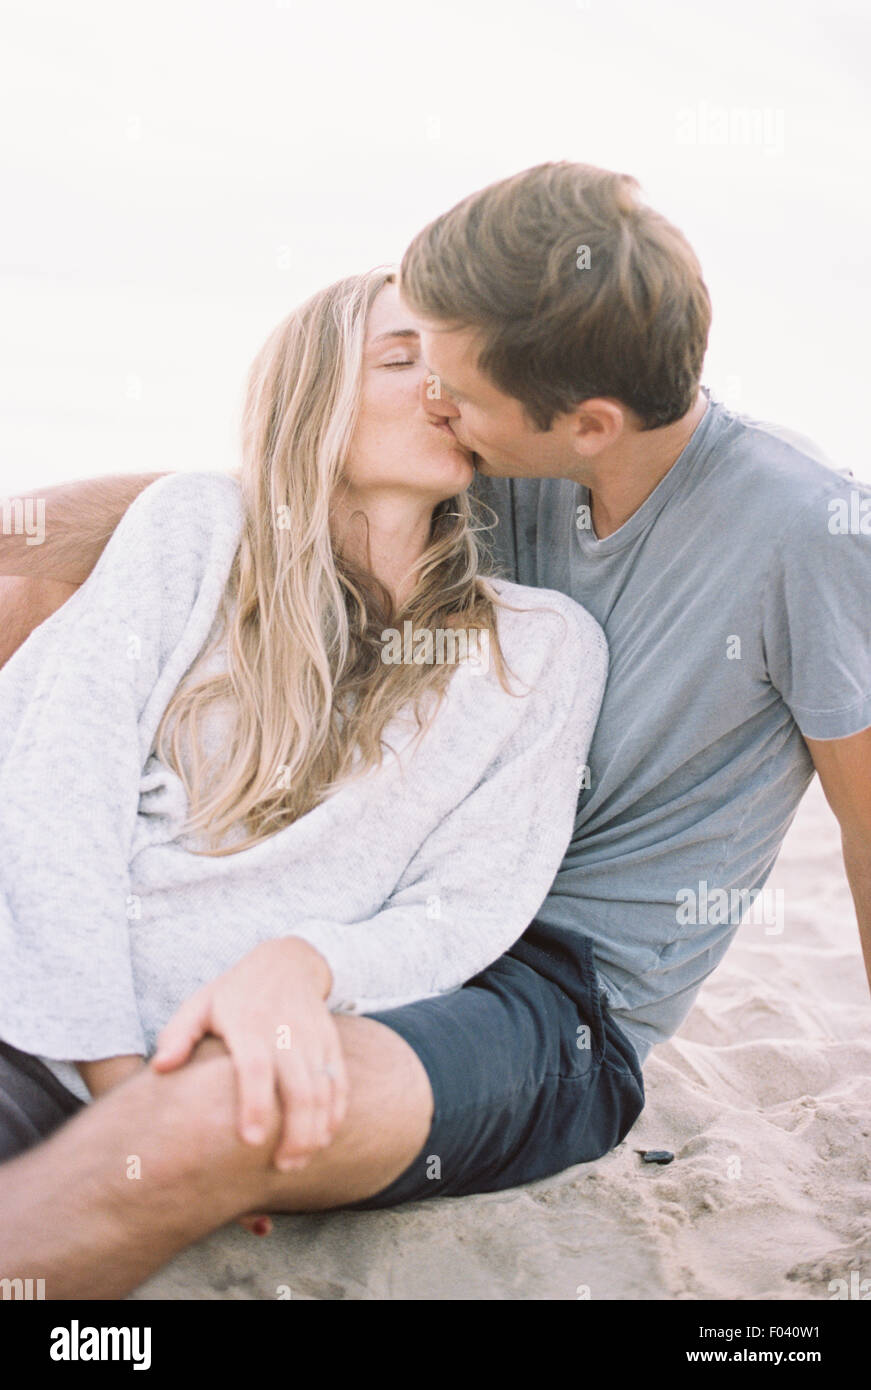 A couple sitting close on a beach, a man and woman with their arms around each other and heads together. Stock Photo